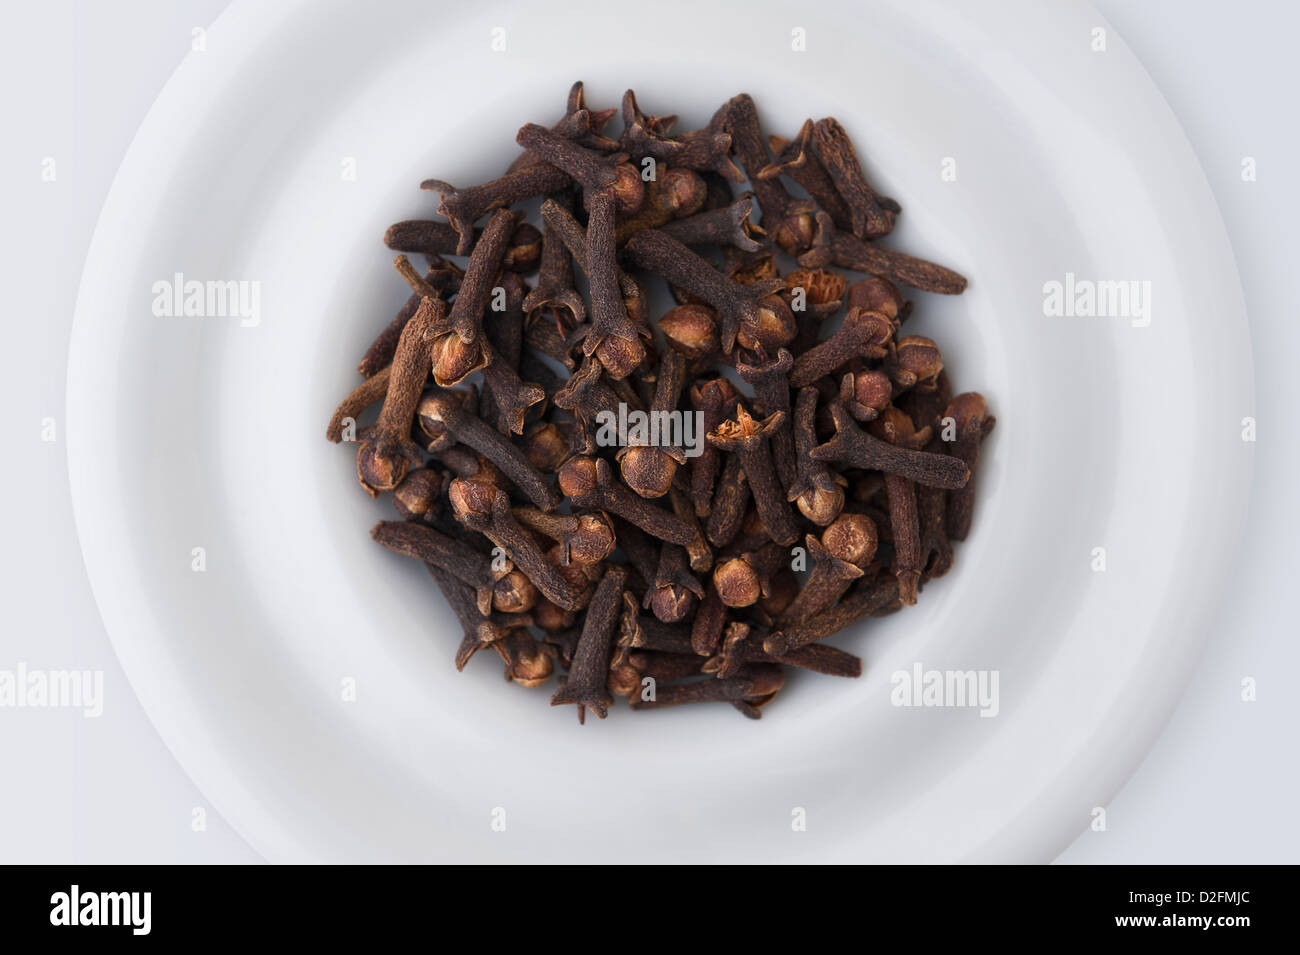 Cloves on a white plate against a white background Stock Photo